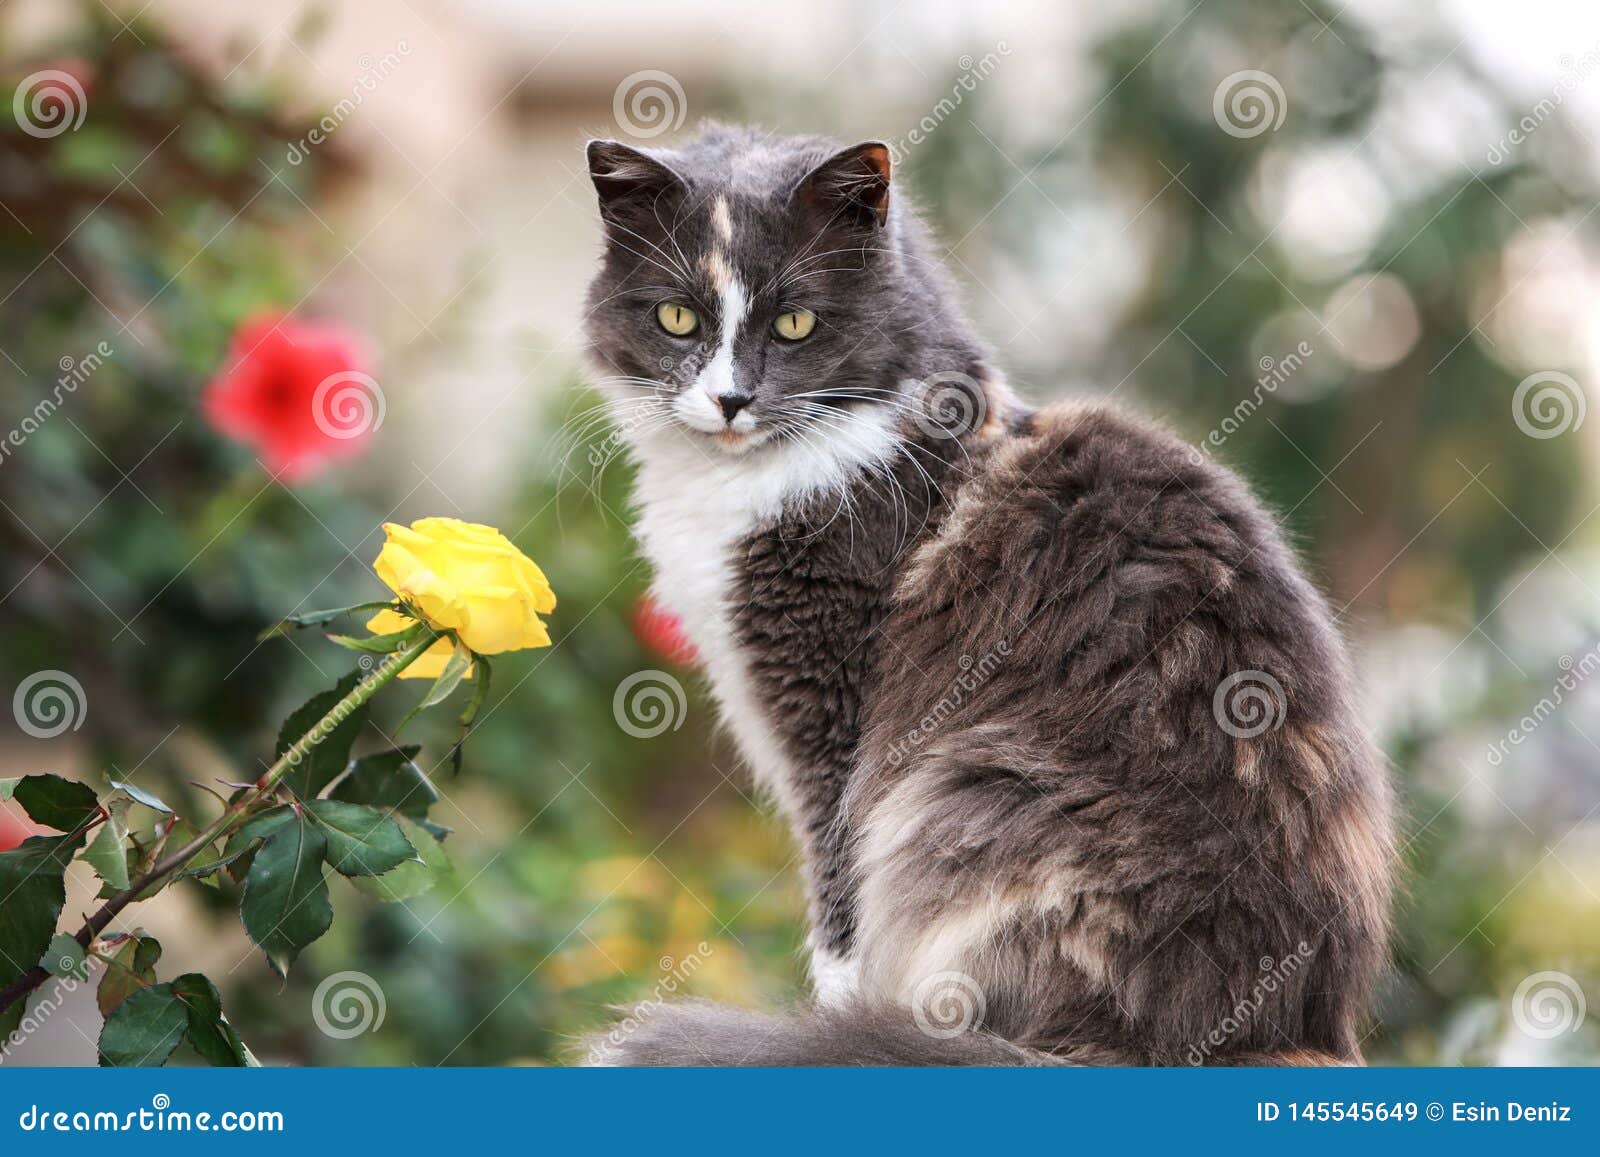 Cute Cat Flowers Stock Photos - Download 9,265 Royalty Free Photos